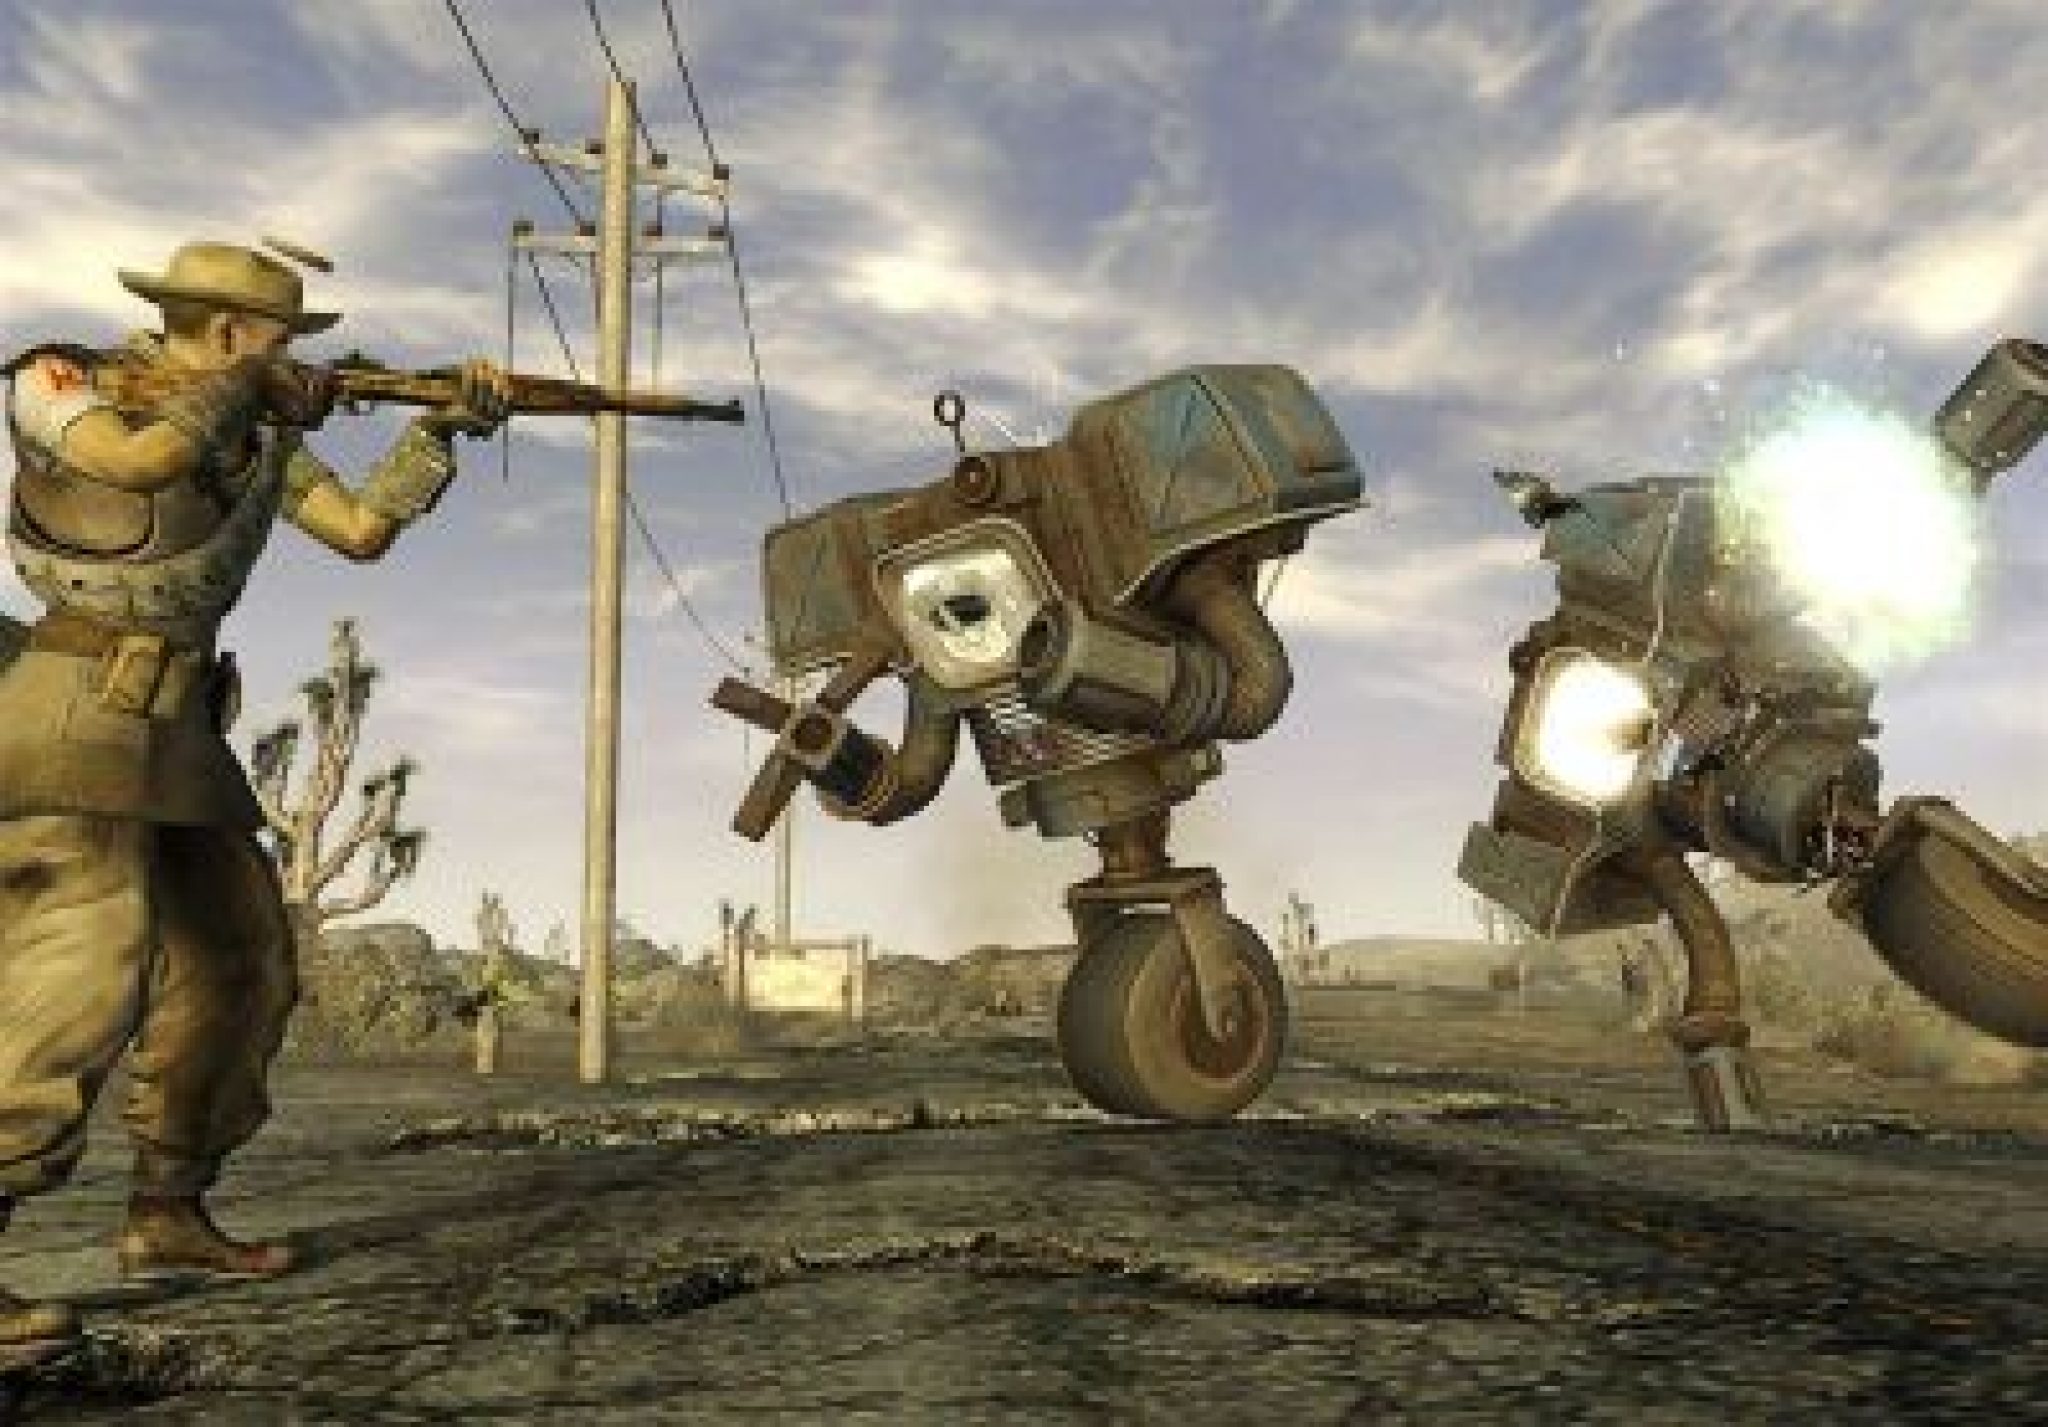 Fallout: New Vegas download the last version for ios